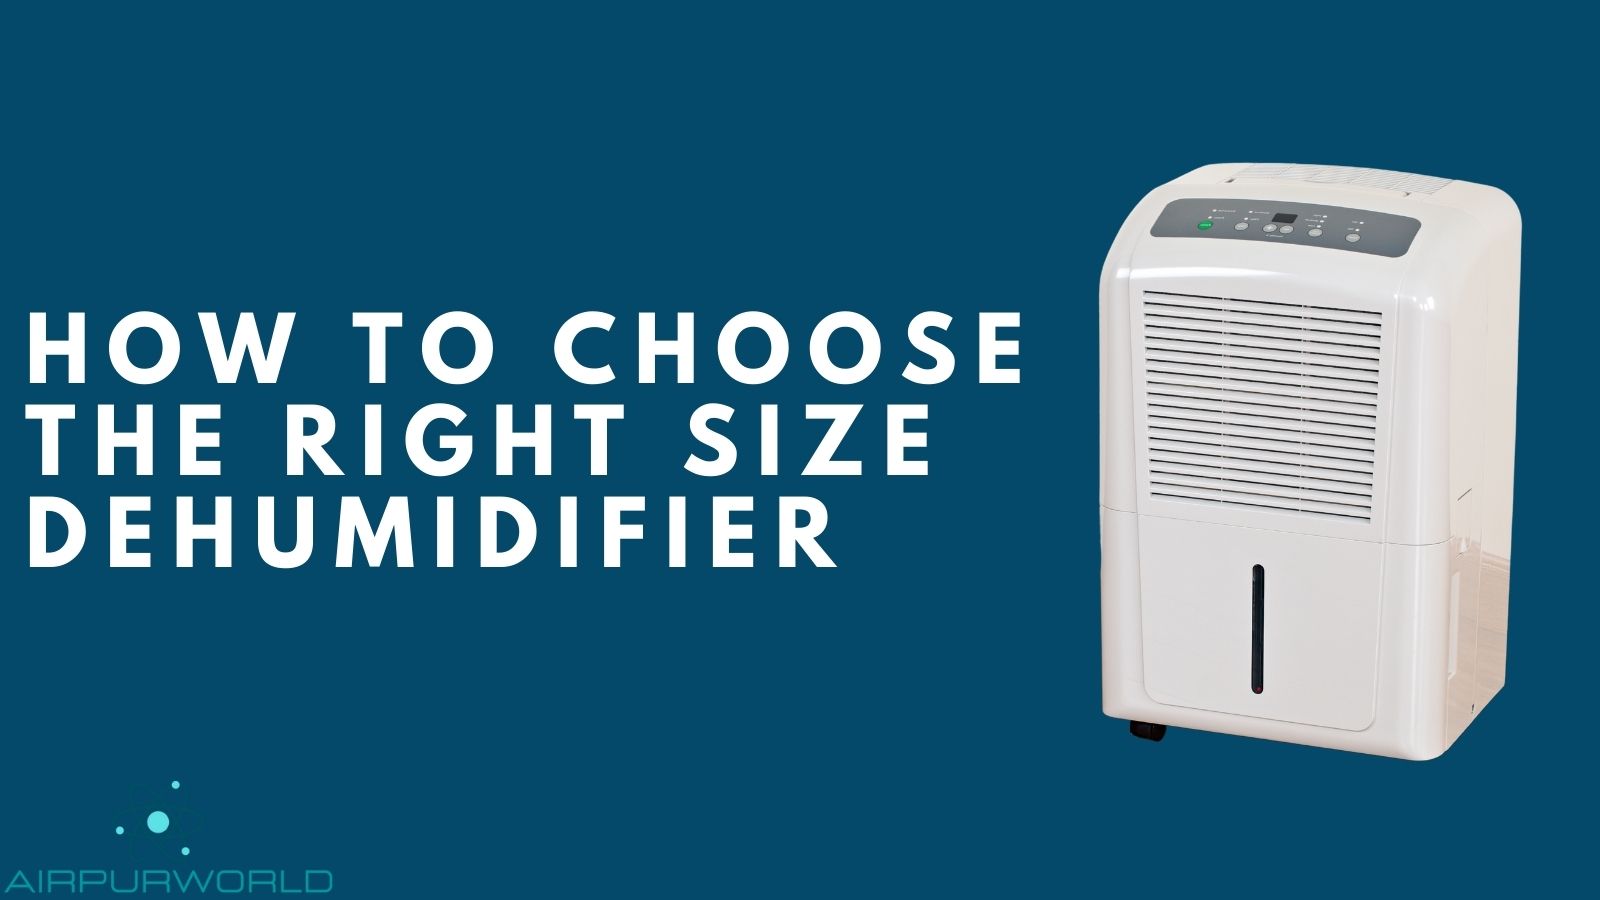 How to Choose the Right Size Dehumidifier for Your Needs